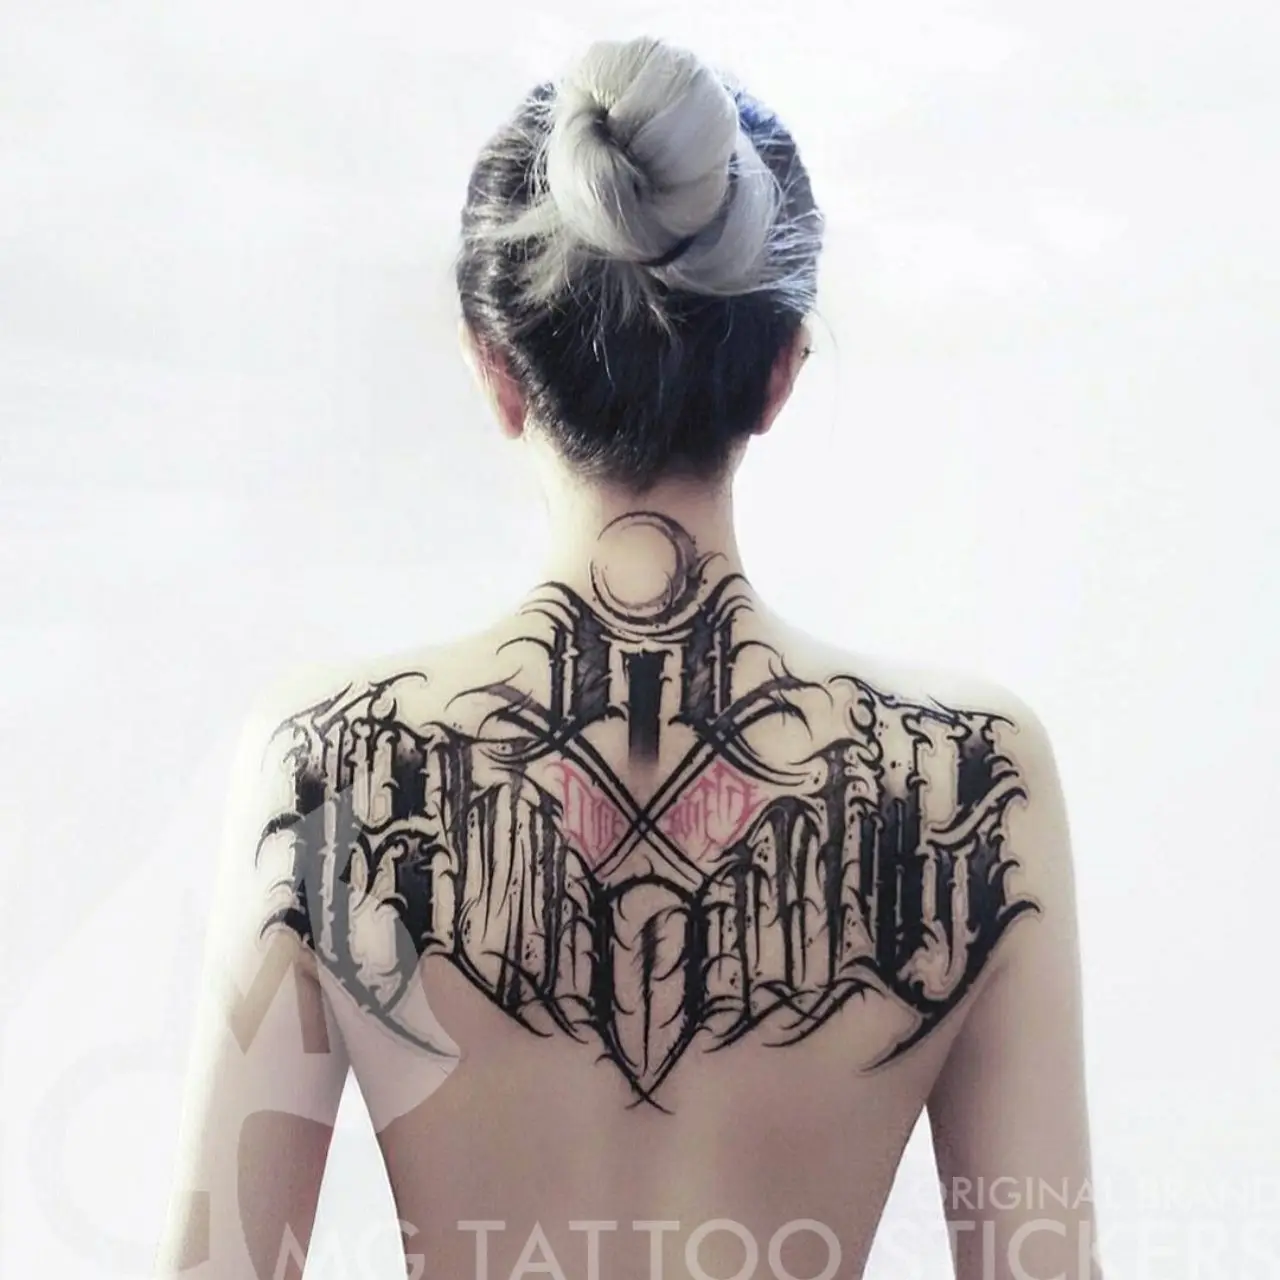 Big Tattoo Simple Geometry Lasting Fake Tattoos for Woman Men Goth Temporary Tattoos Couple Chest Back Art Tattoo Stickers